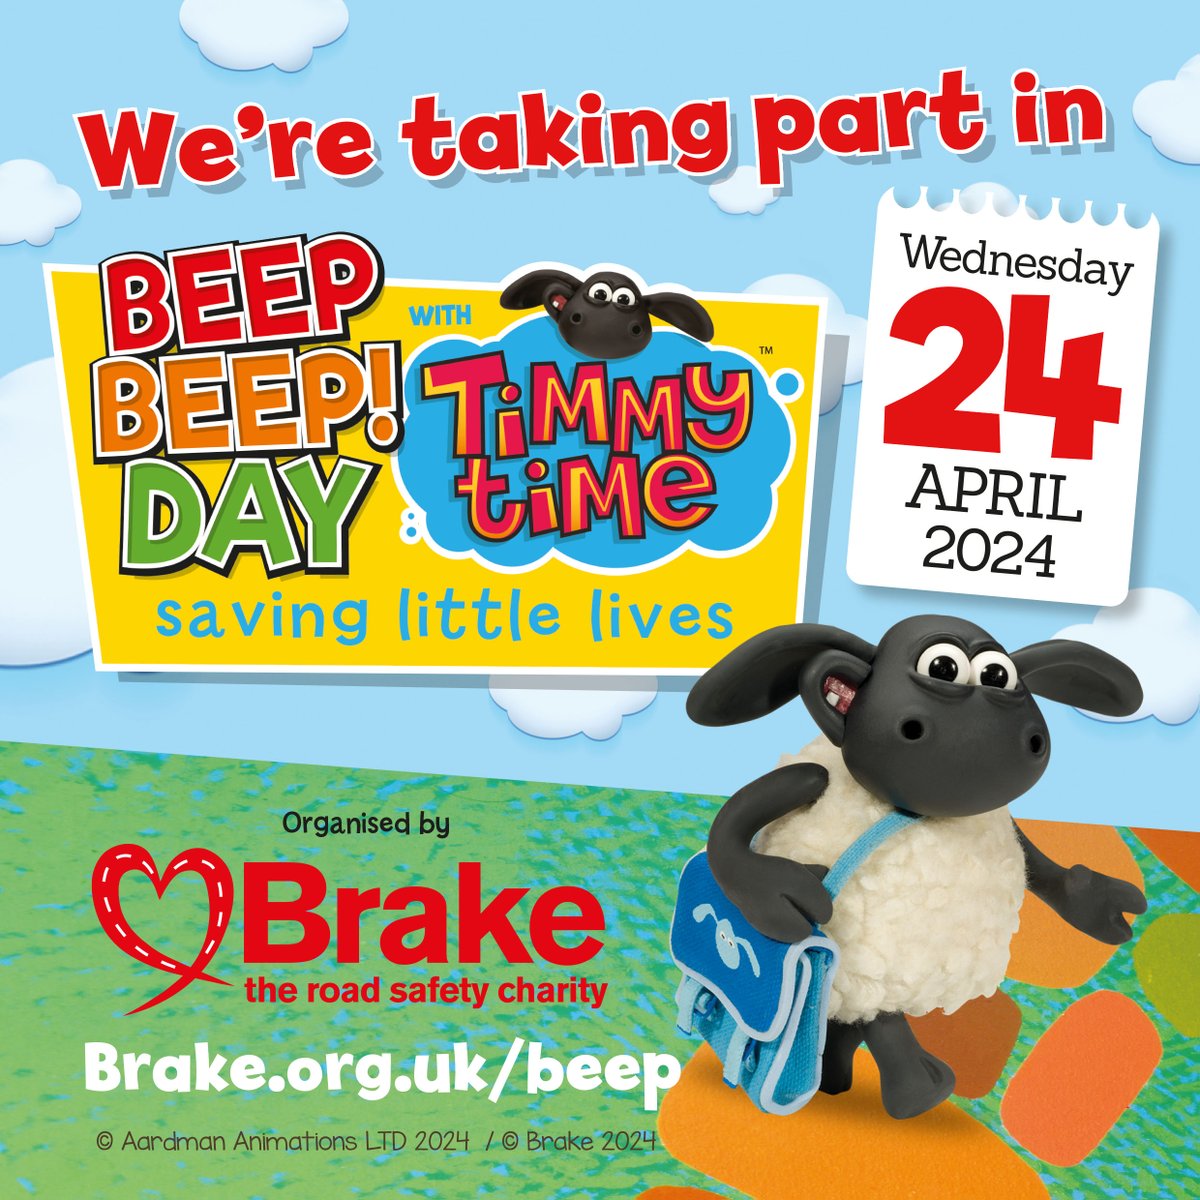 We're providing a free action pack of teaching resources, featuring @aardman's beloved Timmy Time characters, to everyone who signs up brake.org.uk/beep Thank you to everyone who has supported this important campaign again this year! #beepbeepday